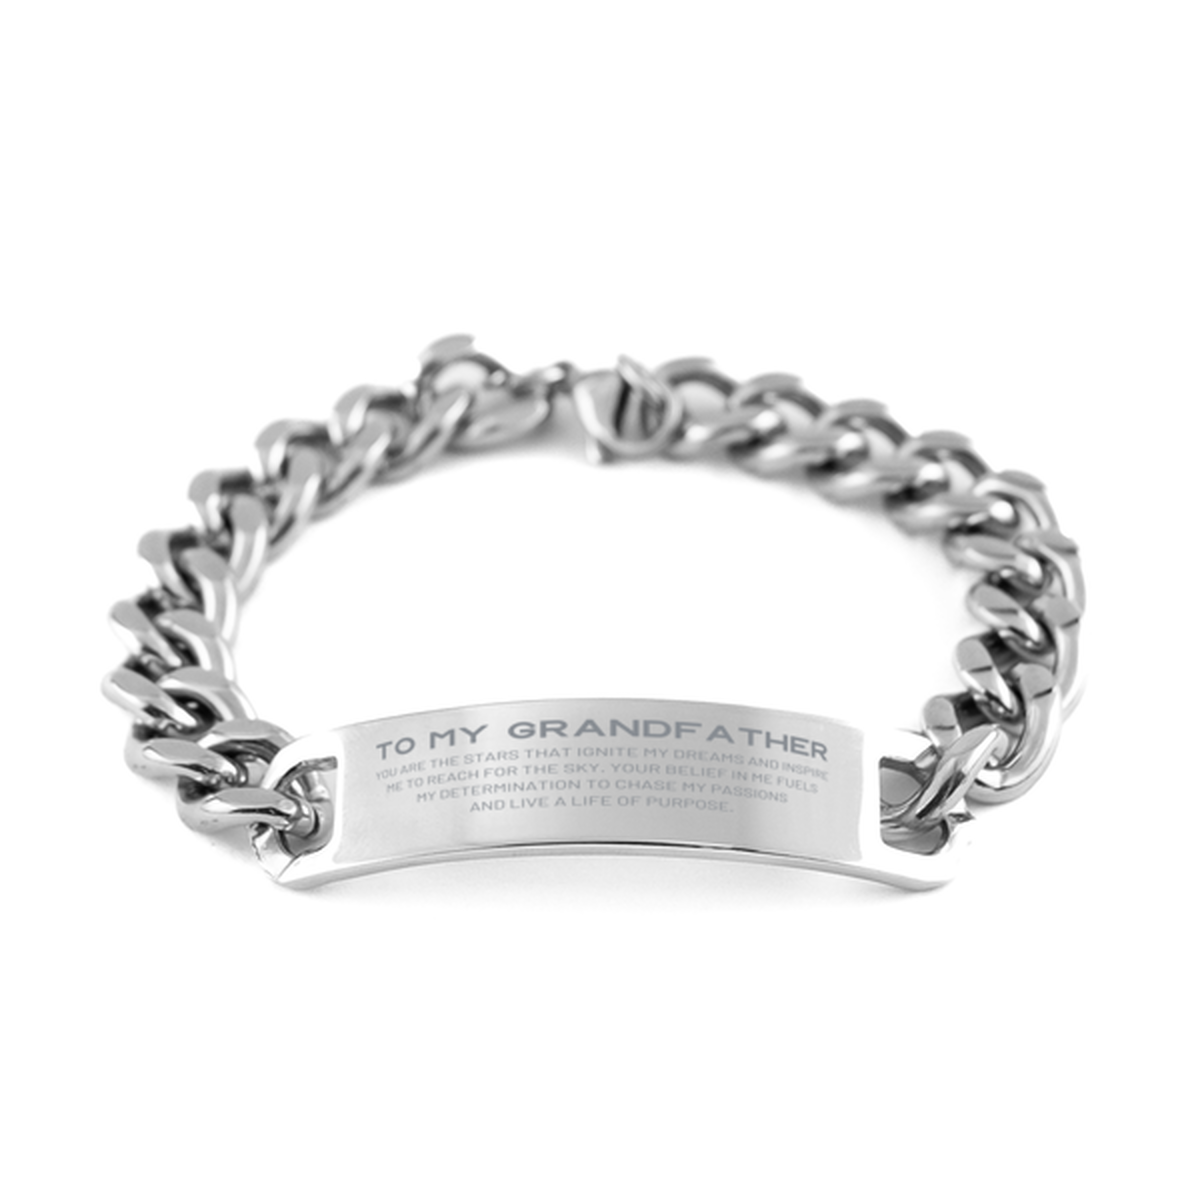 To My Grandfather Cuban Chain Stainless Steel Bracelet, You are the stars that ignite my dreams and inspire me to reach for the sky, Birthday Unique Gifts For Grandfather, Thank You Gifts For Grandfather